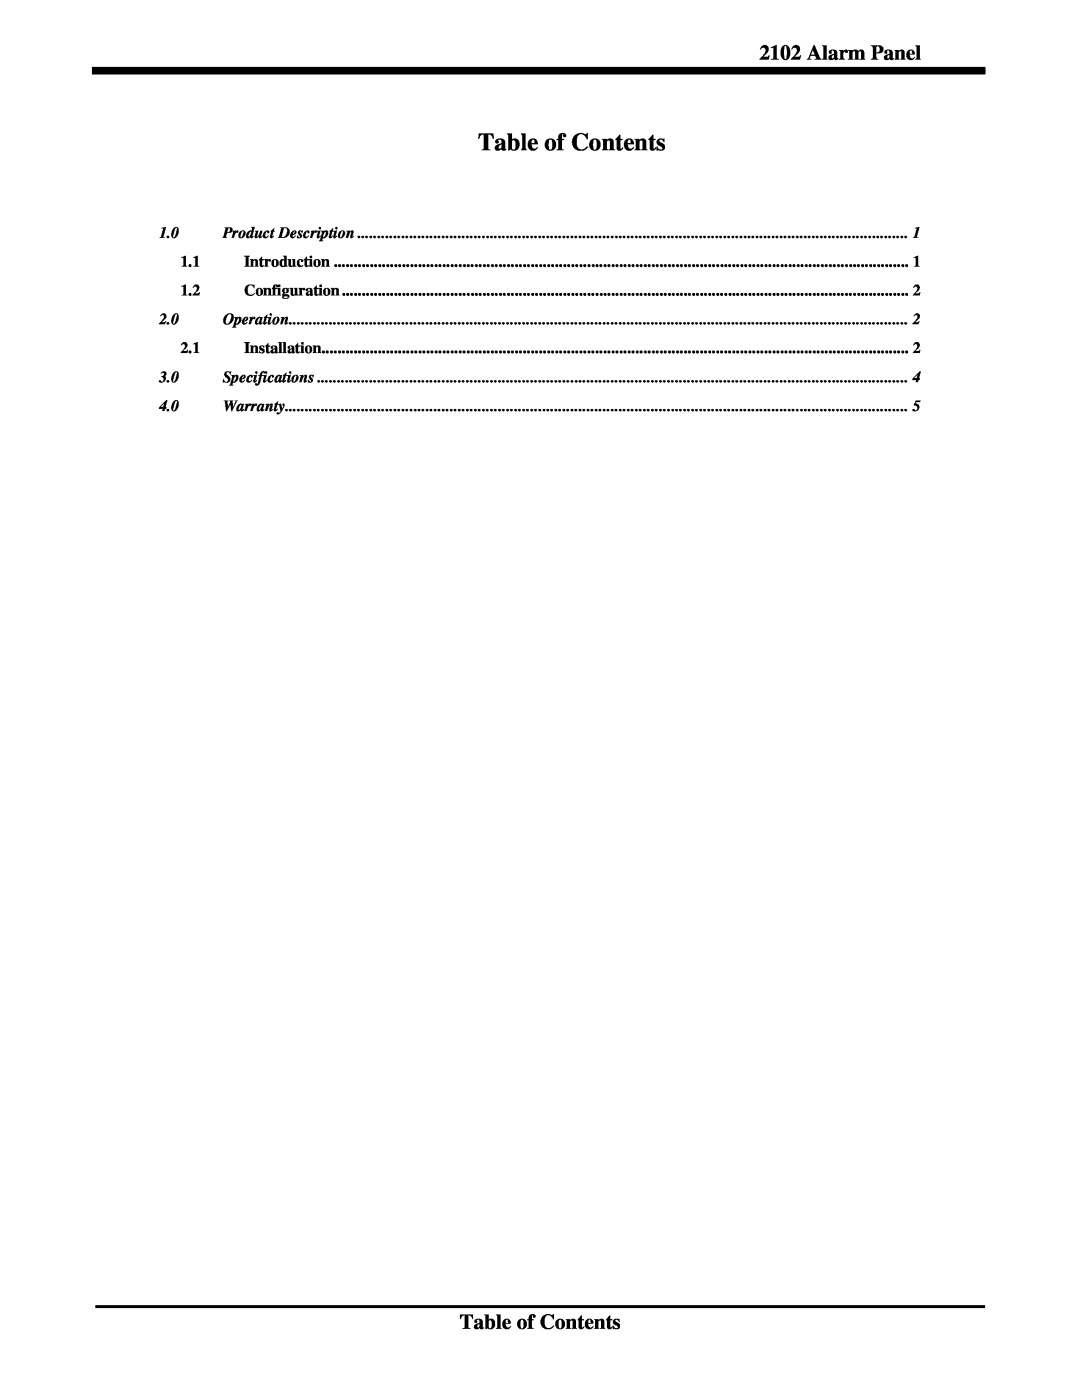 SMC Networks 2102 manual Table of Contents, Alarm Panel 